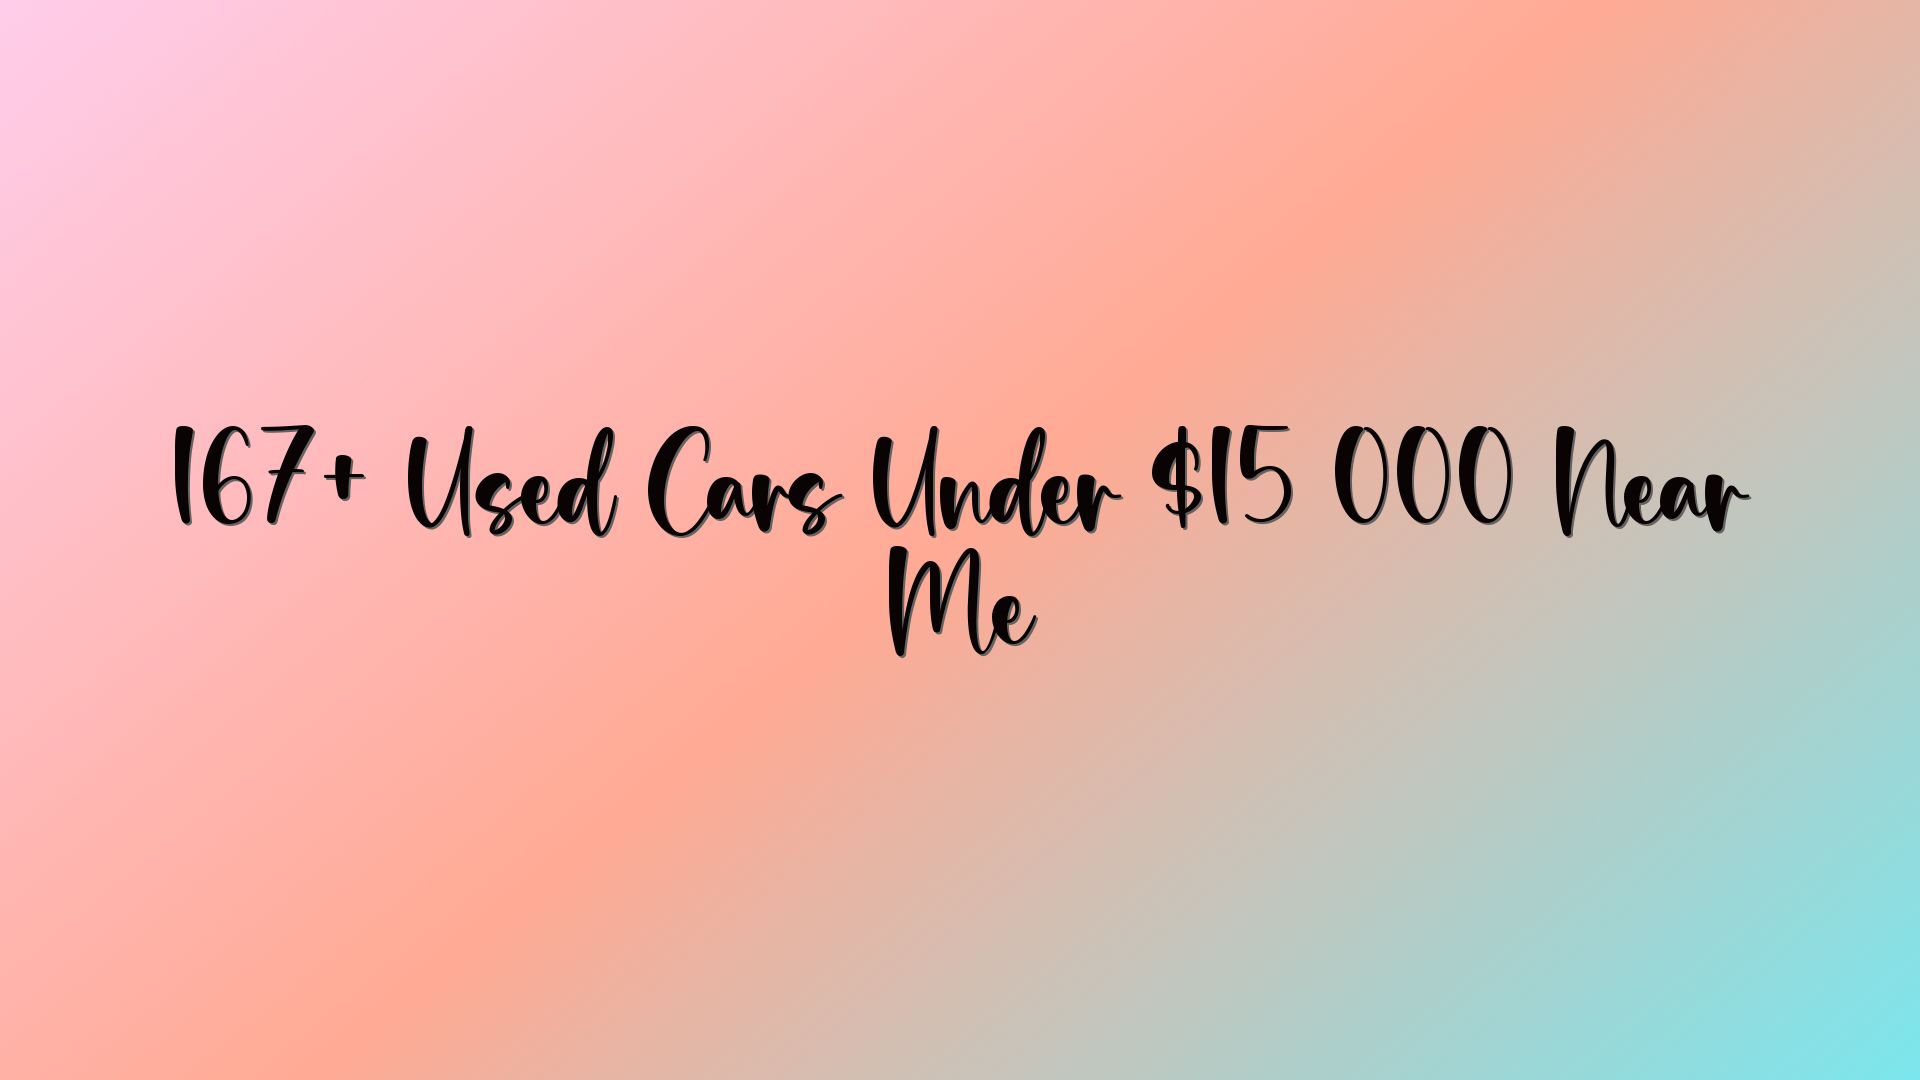 167+ Used Cars Under $15 000 Near Me